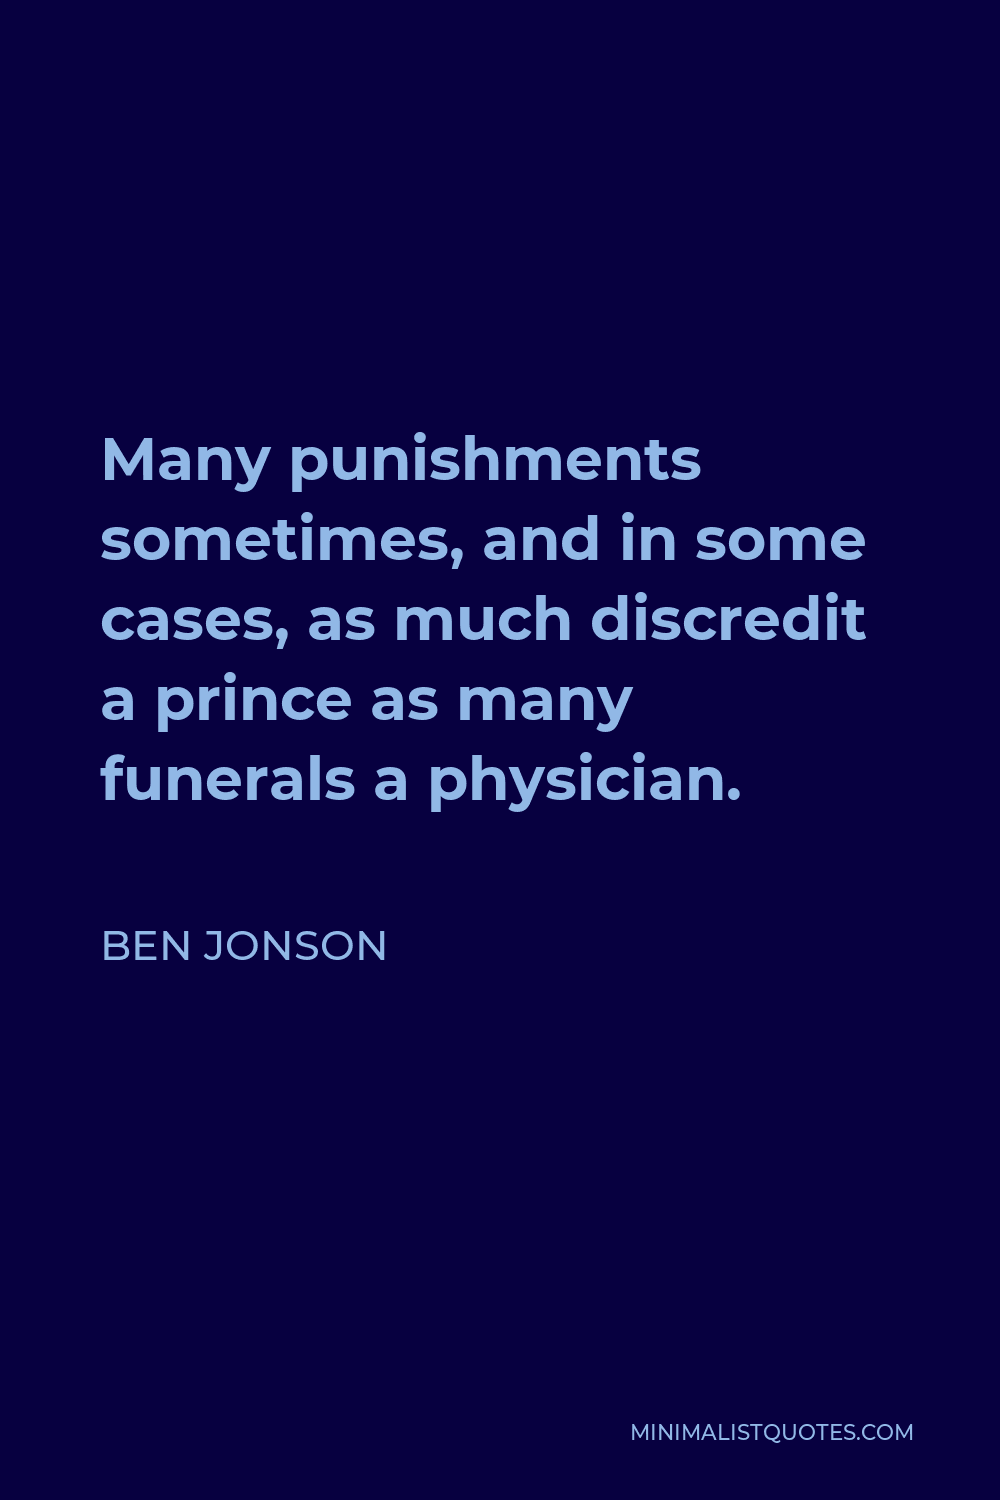 Ben Jonson Quote - Many punishments sometimes, and in some cases, as much discredit a prince as many funerals a physician.